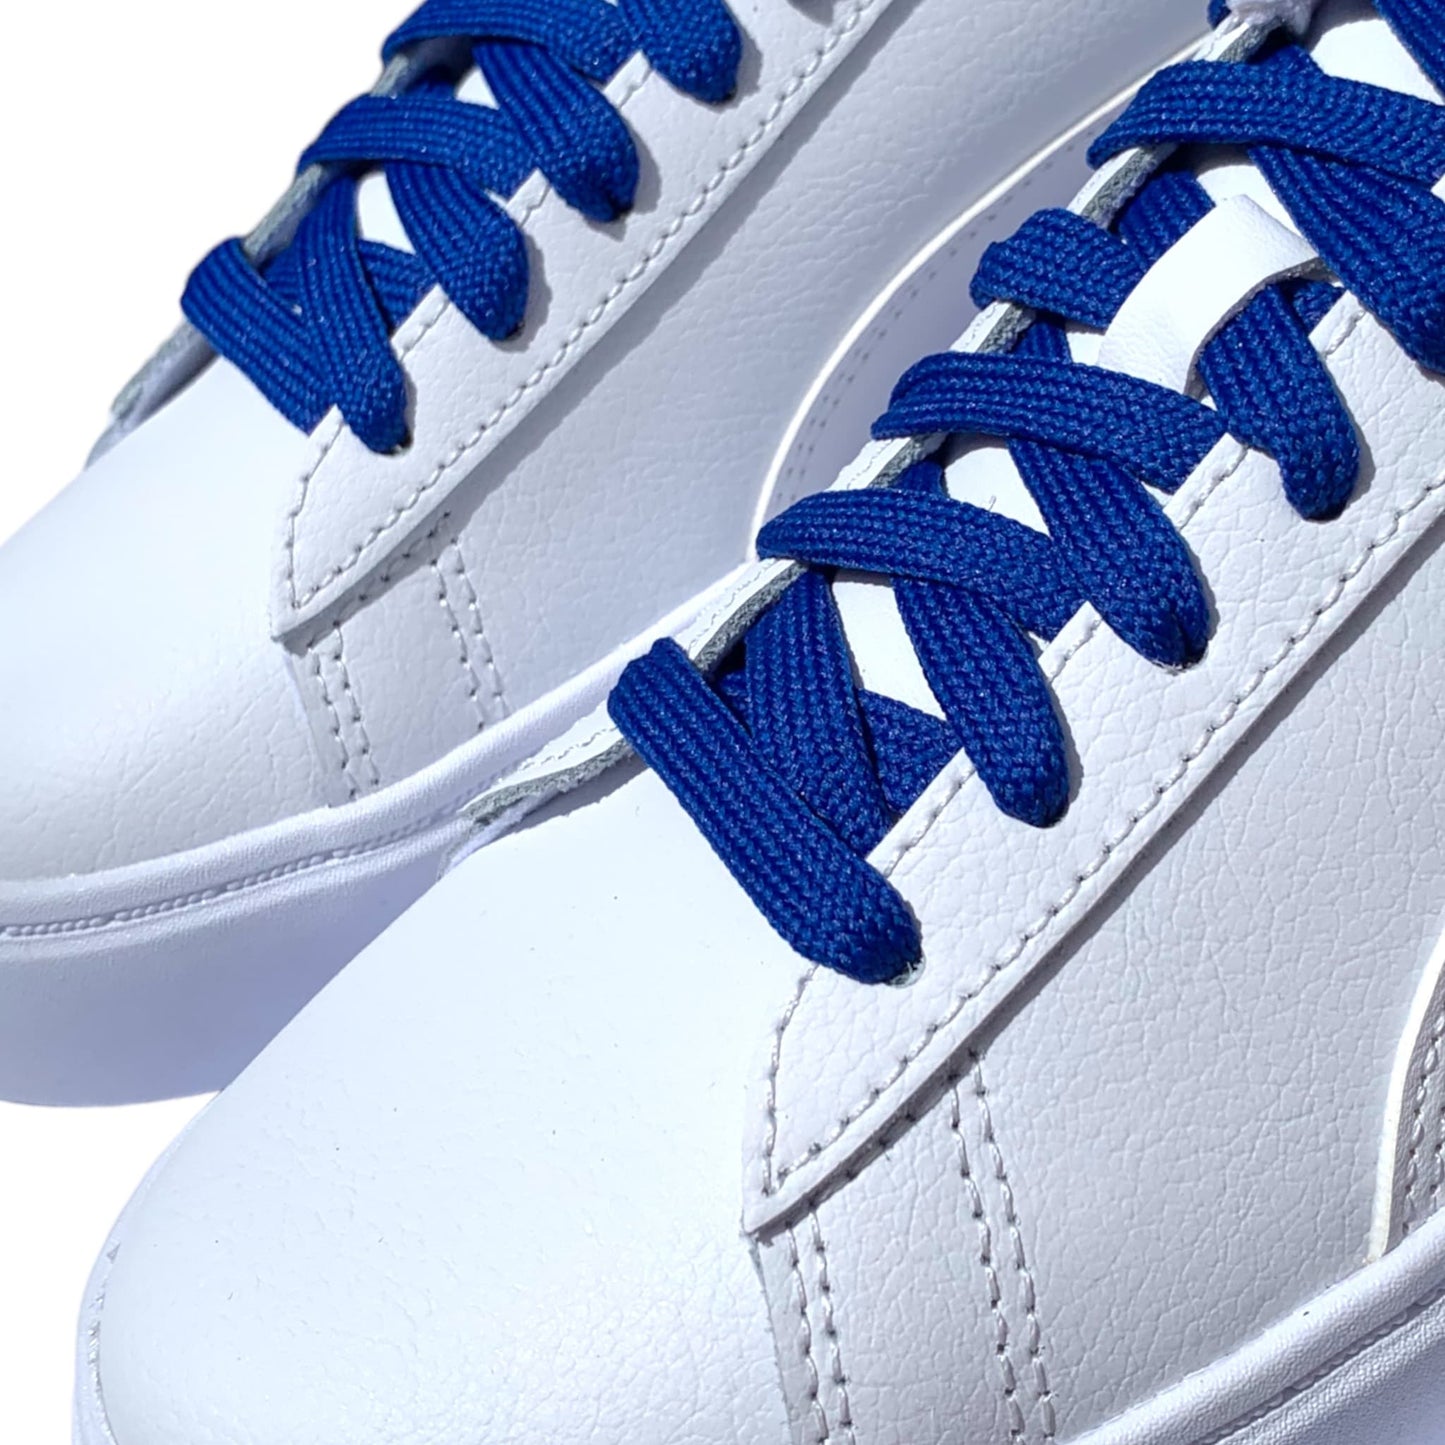 Game Royal Blue Shoelaces in white sneakers